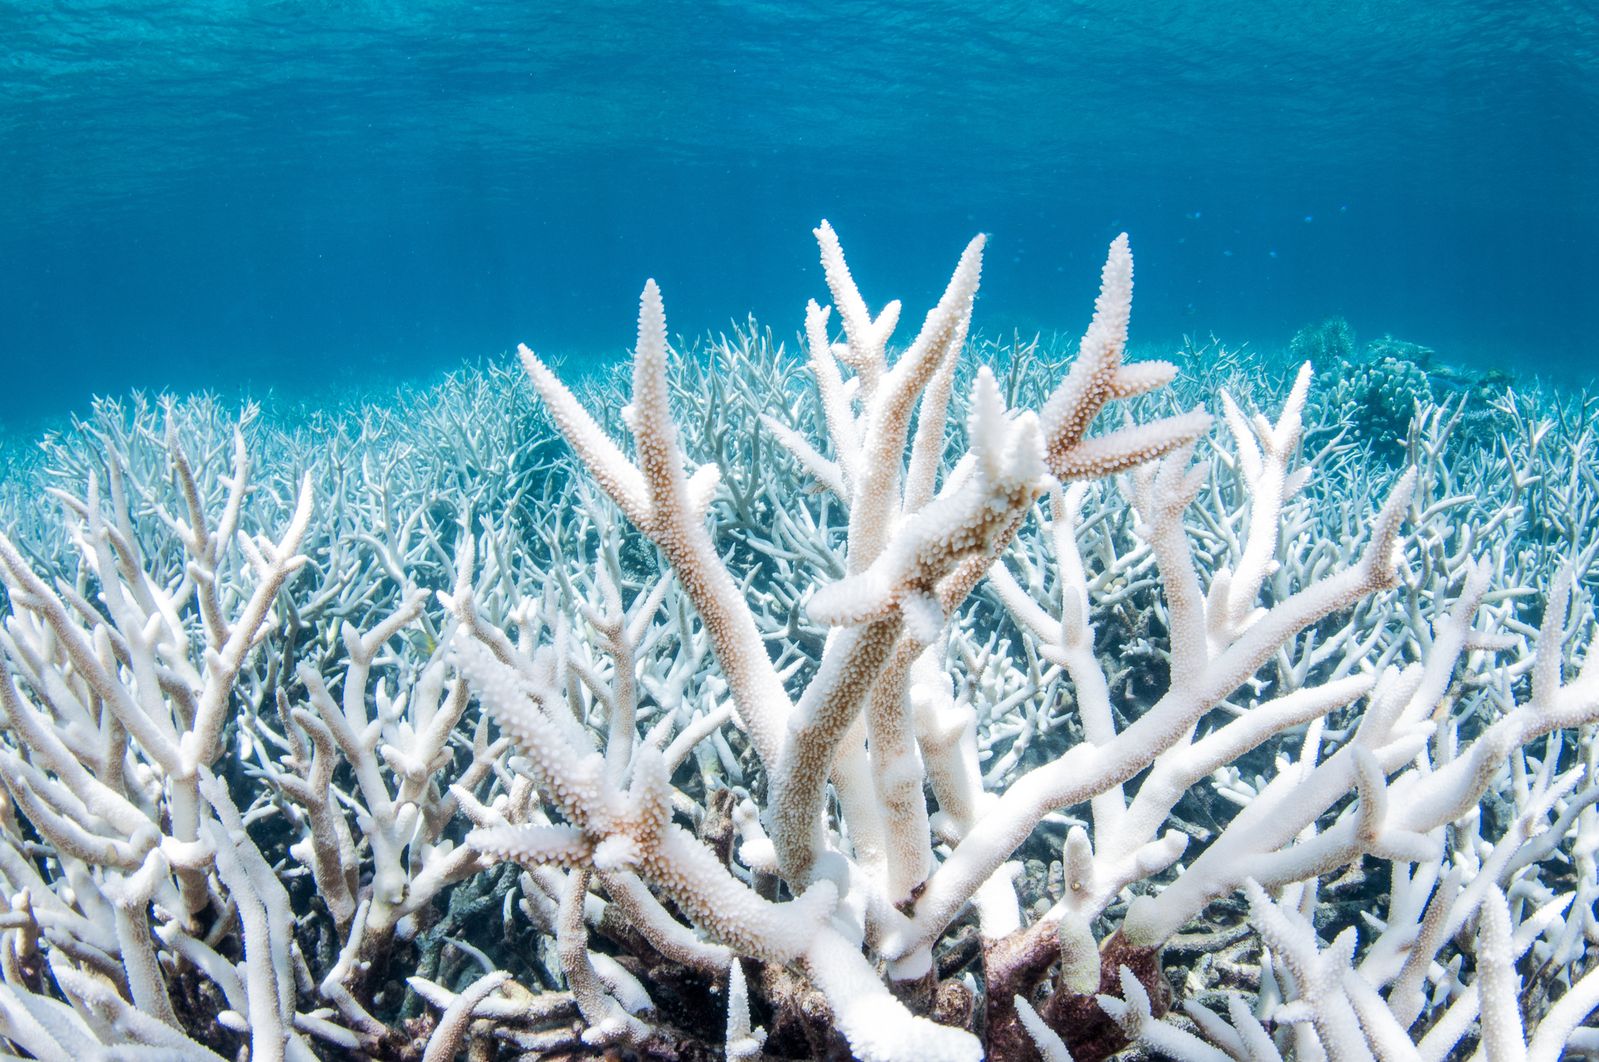 The impacted reefs represent 54 percent of the planet’s total, and that figure is currently increasing by 1 percent each week, NOAA scientists s